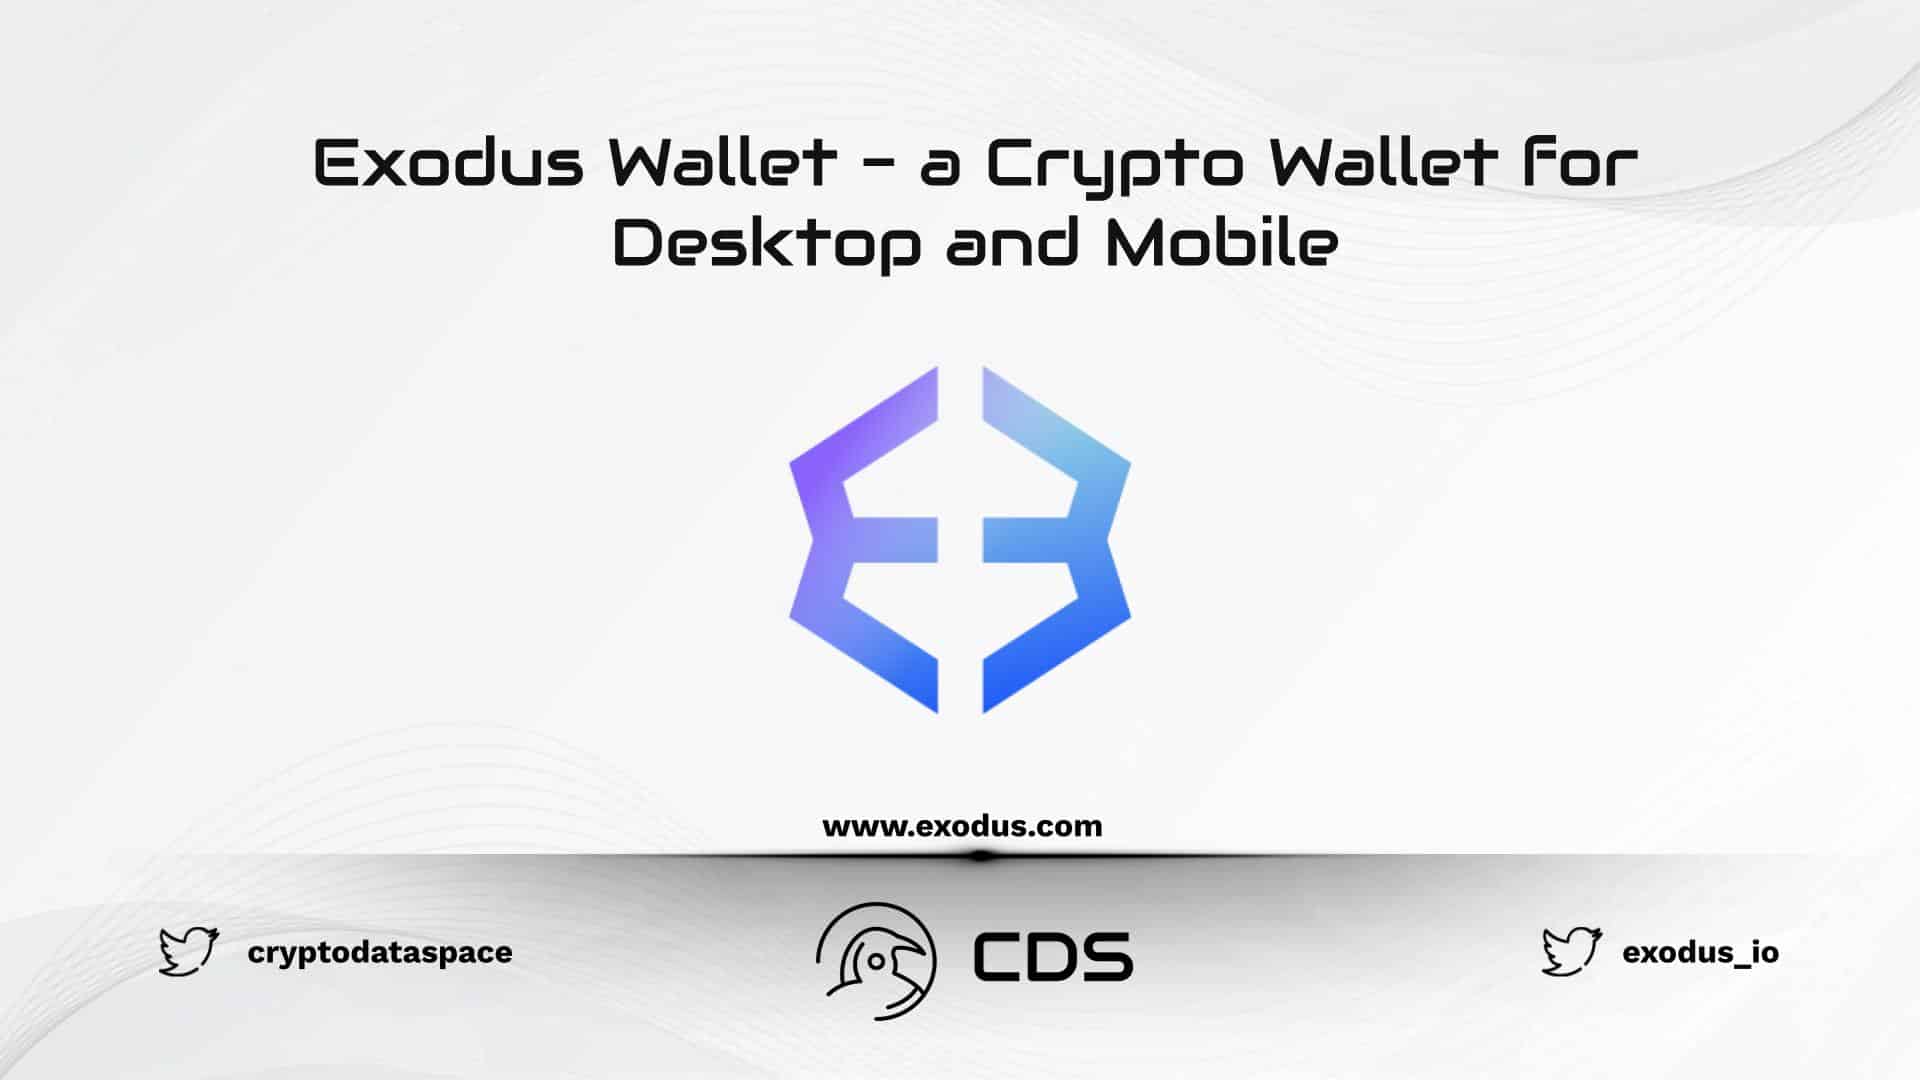 Exodus Wallet - a Crypto Wallet for Desktop and Mobile